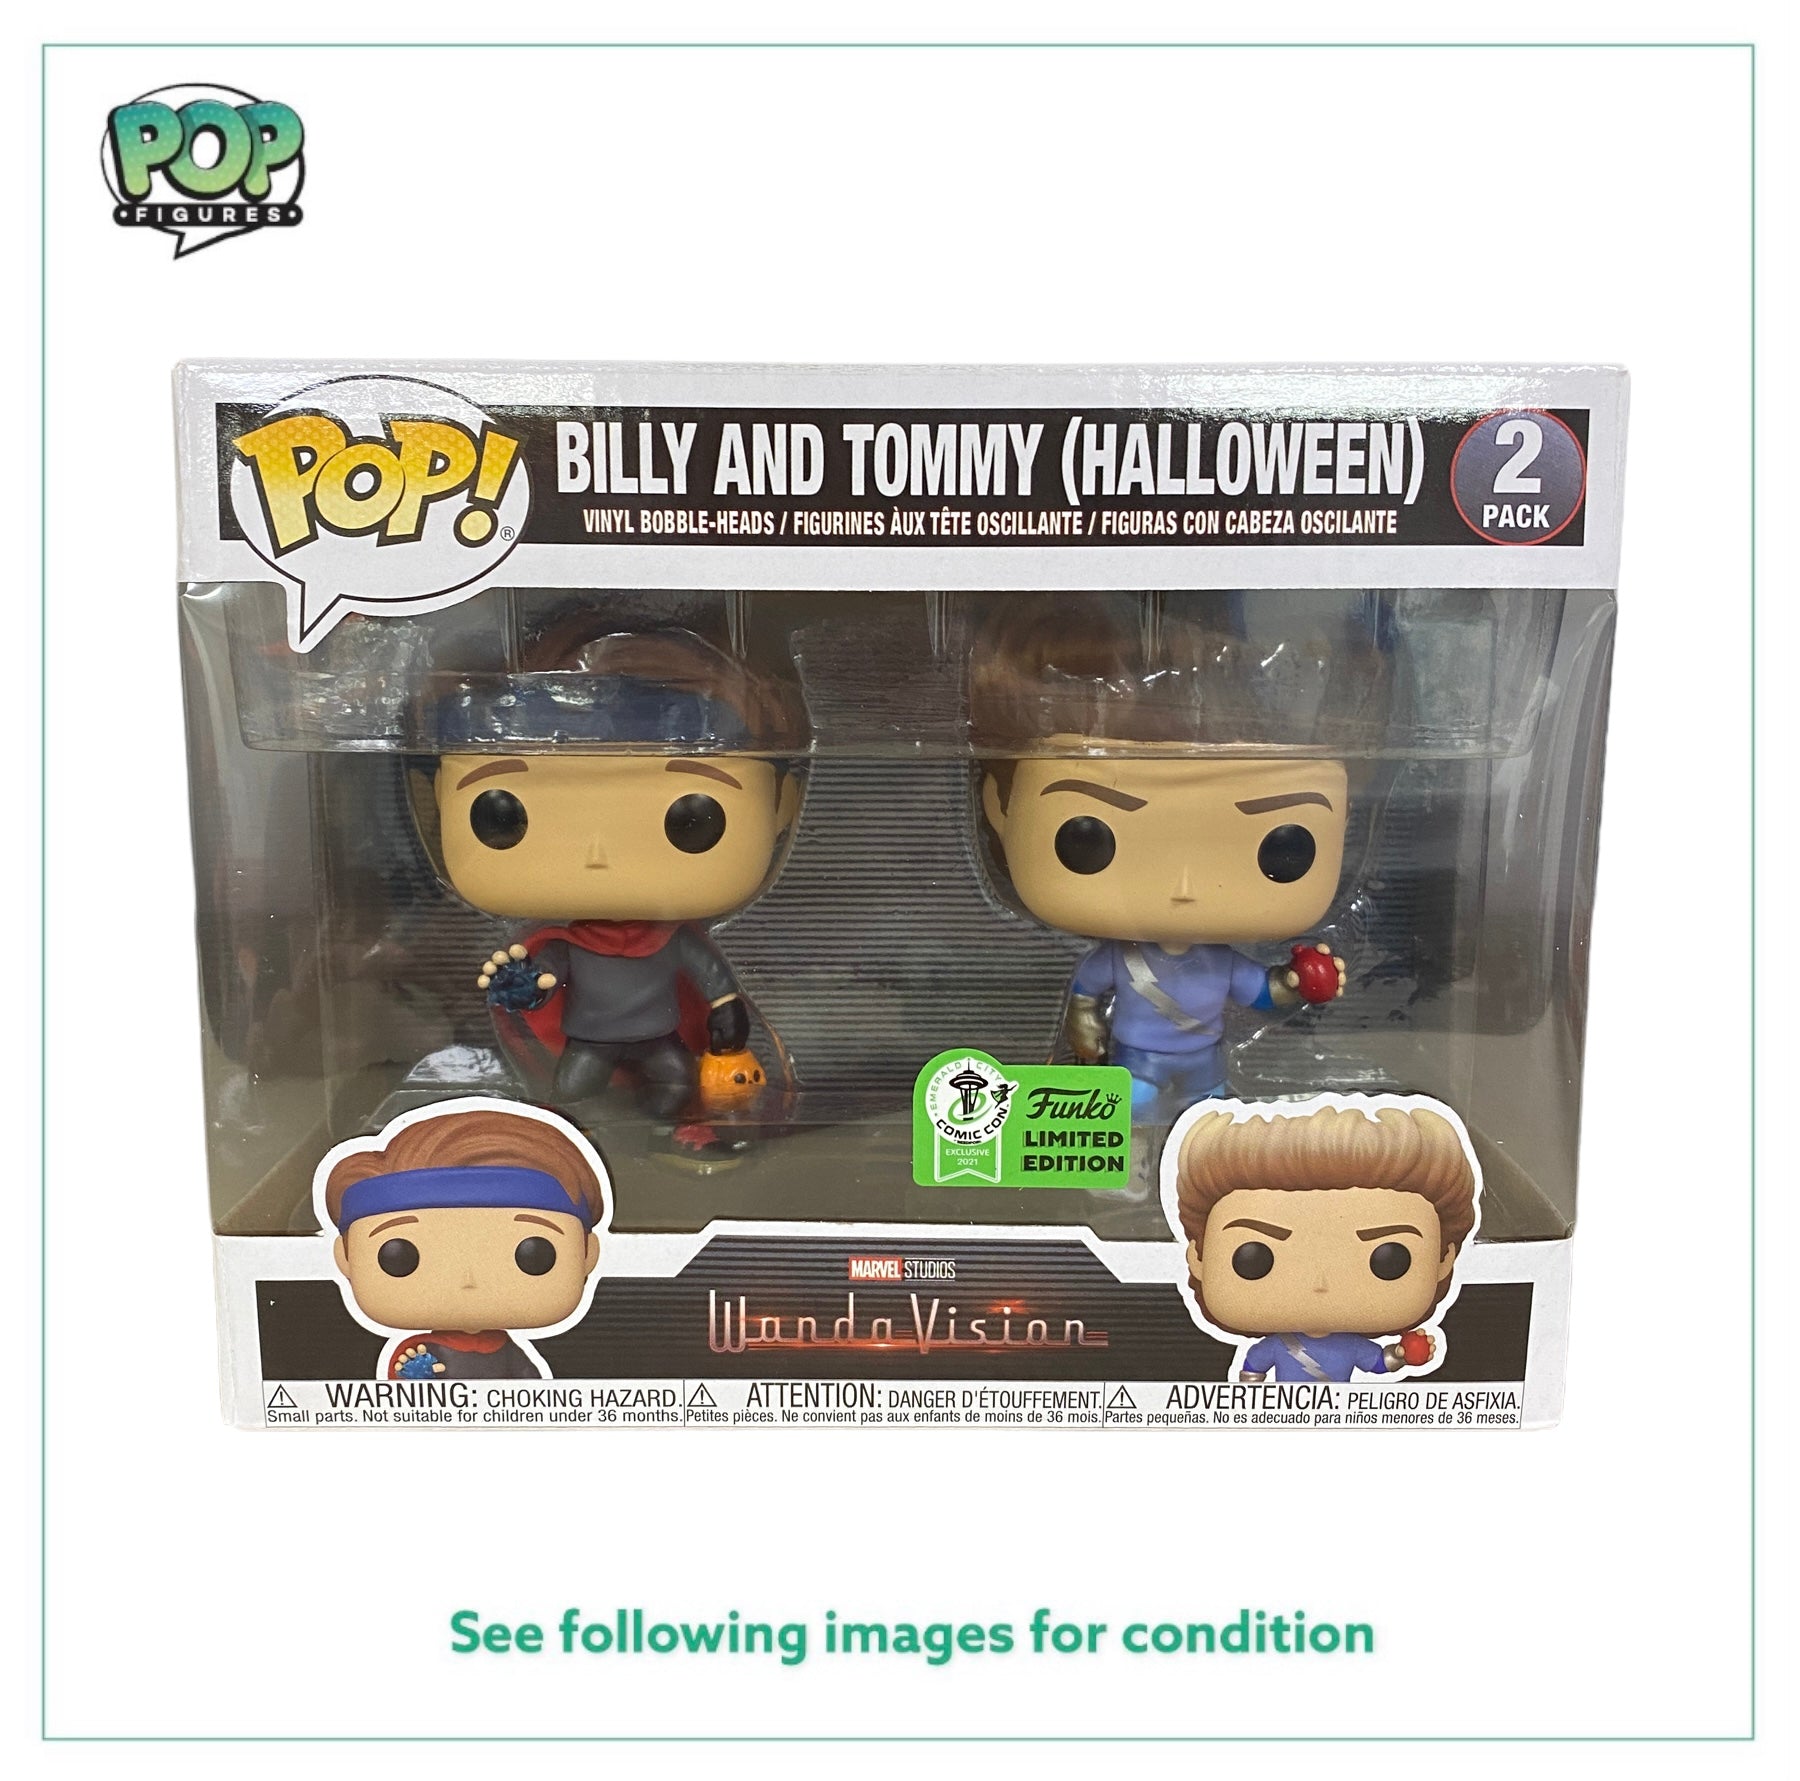 Billy And Tommy (Halloween) 2 Pack Funko Pop! - Wandavision - ECCC 2021 Official Convention Exclusive - Condition 9.5/10